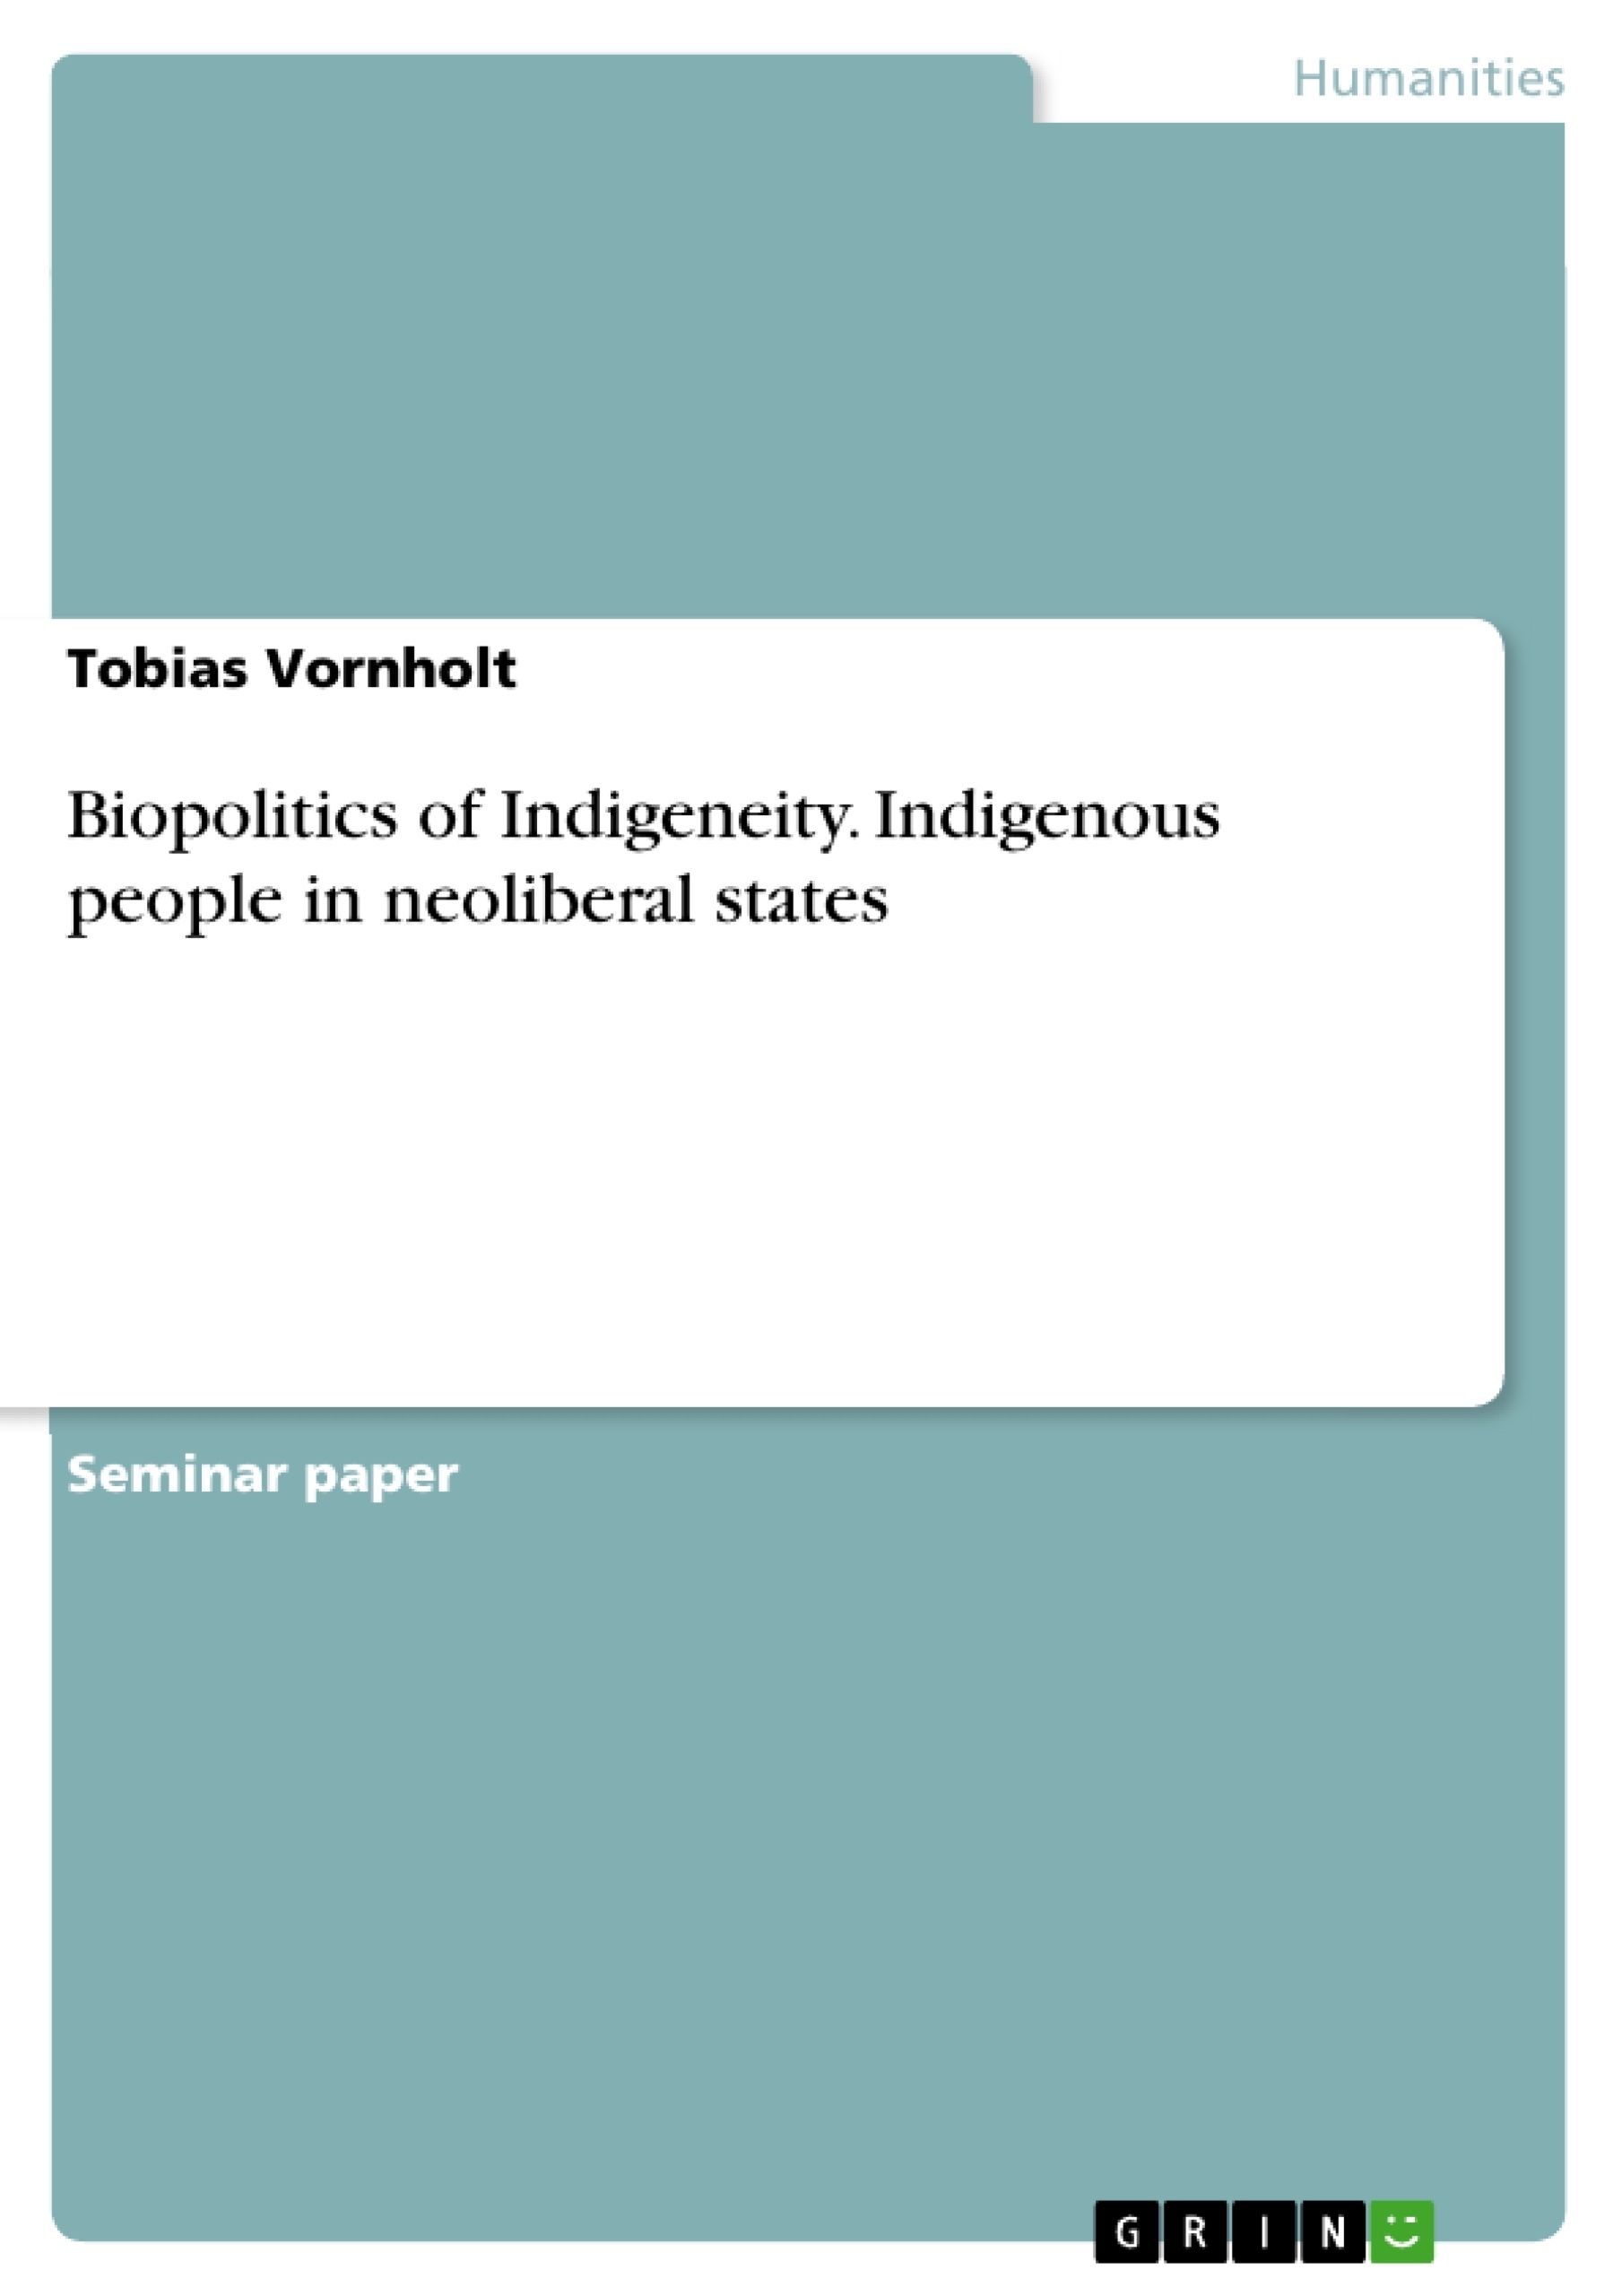 Title: Biopolitics of Indigeneity. Indigenous people in neoliberal states